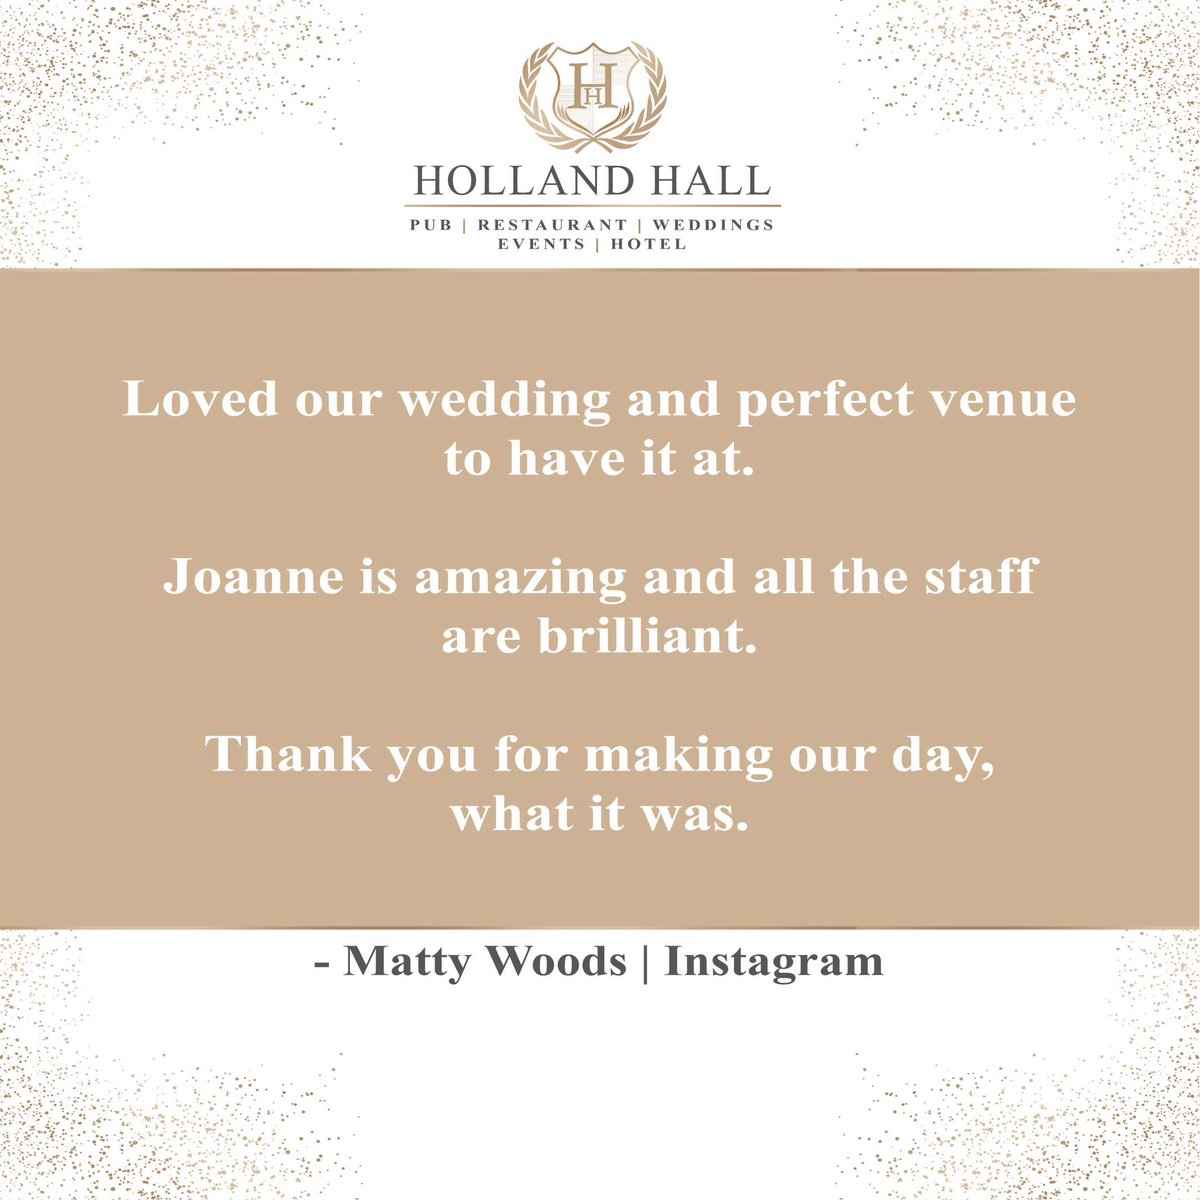 Thank you Matty for your lovely comments! It was our pleasure to host your dream day! 💒 💗🫶🏼

#ThankYou #GreatReview #GreatFood #GreatService #GreatVenue #wearehollandhall